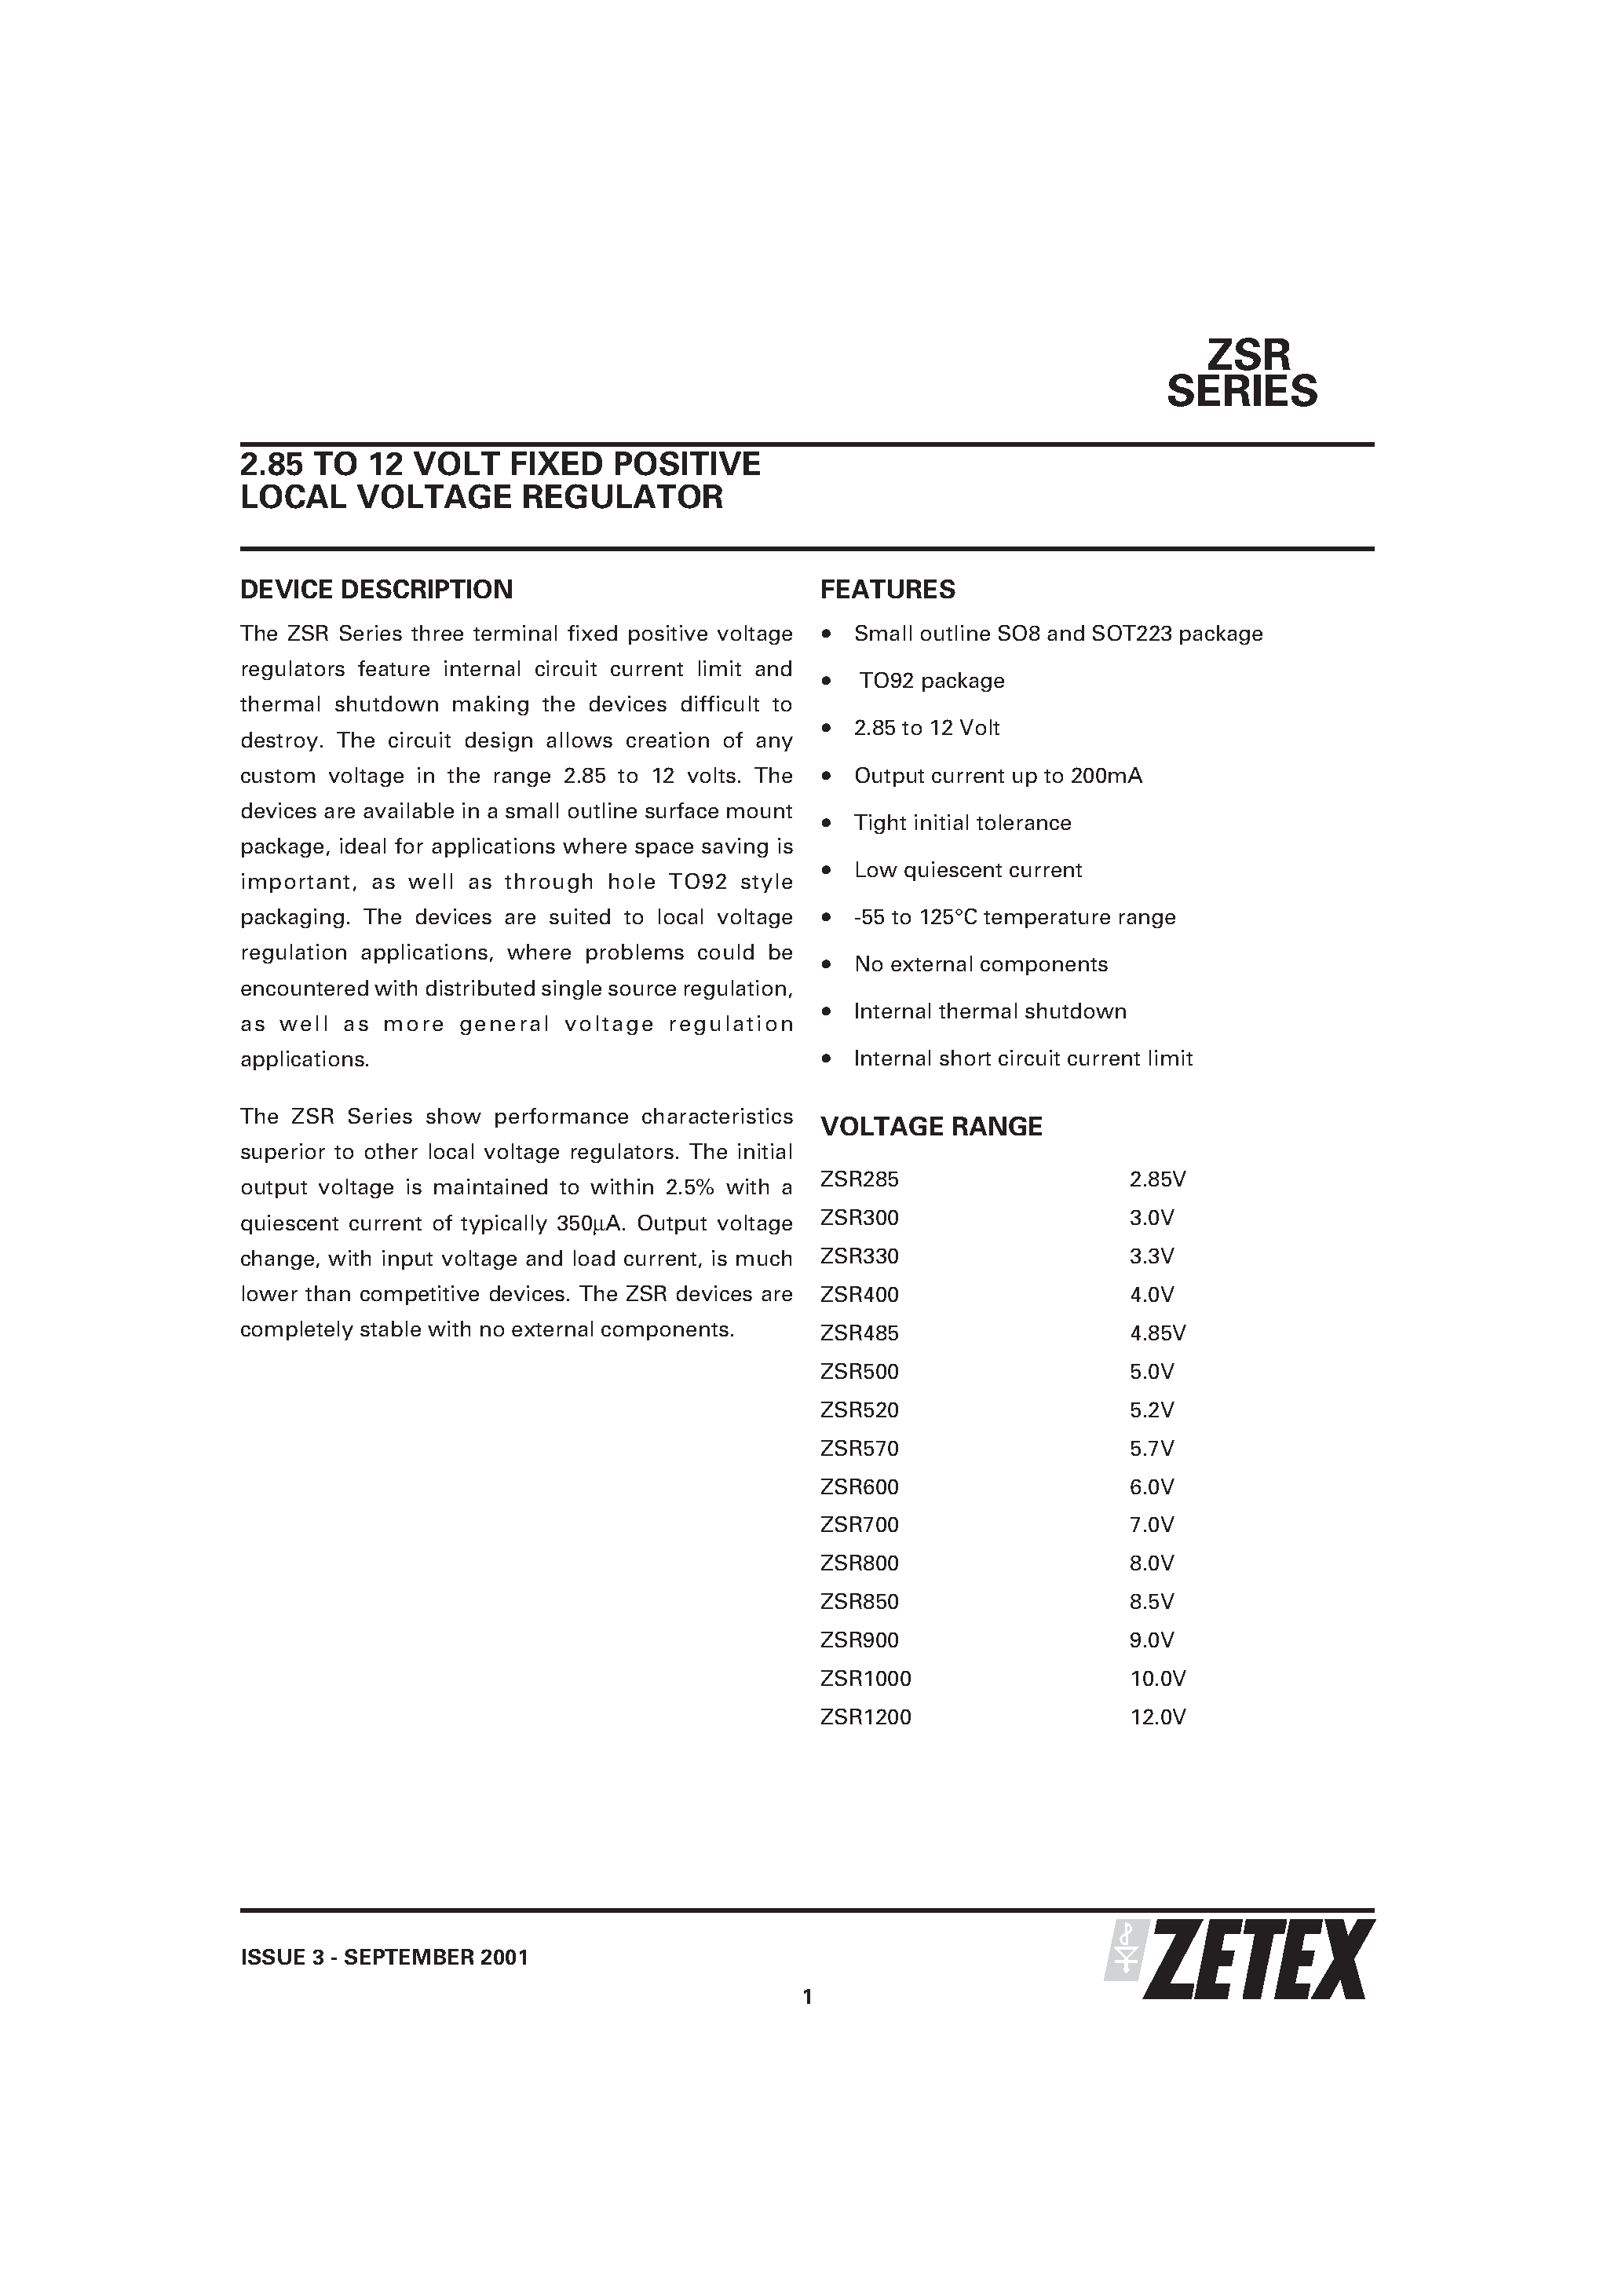 Datasheet ZSR500N8 - 2.85 TO 12 VOLT FIXED POSITIVE LOCAL VOLTAGE REGULATOR page 1